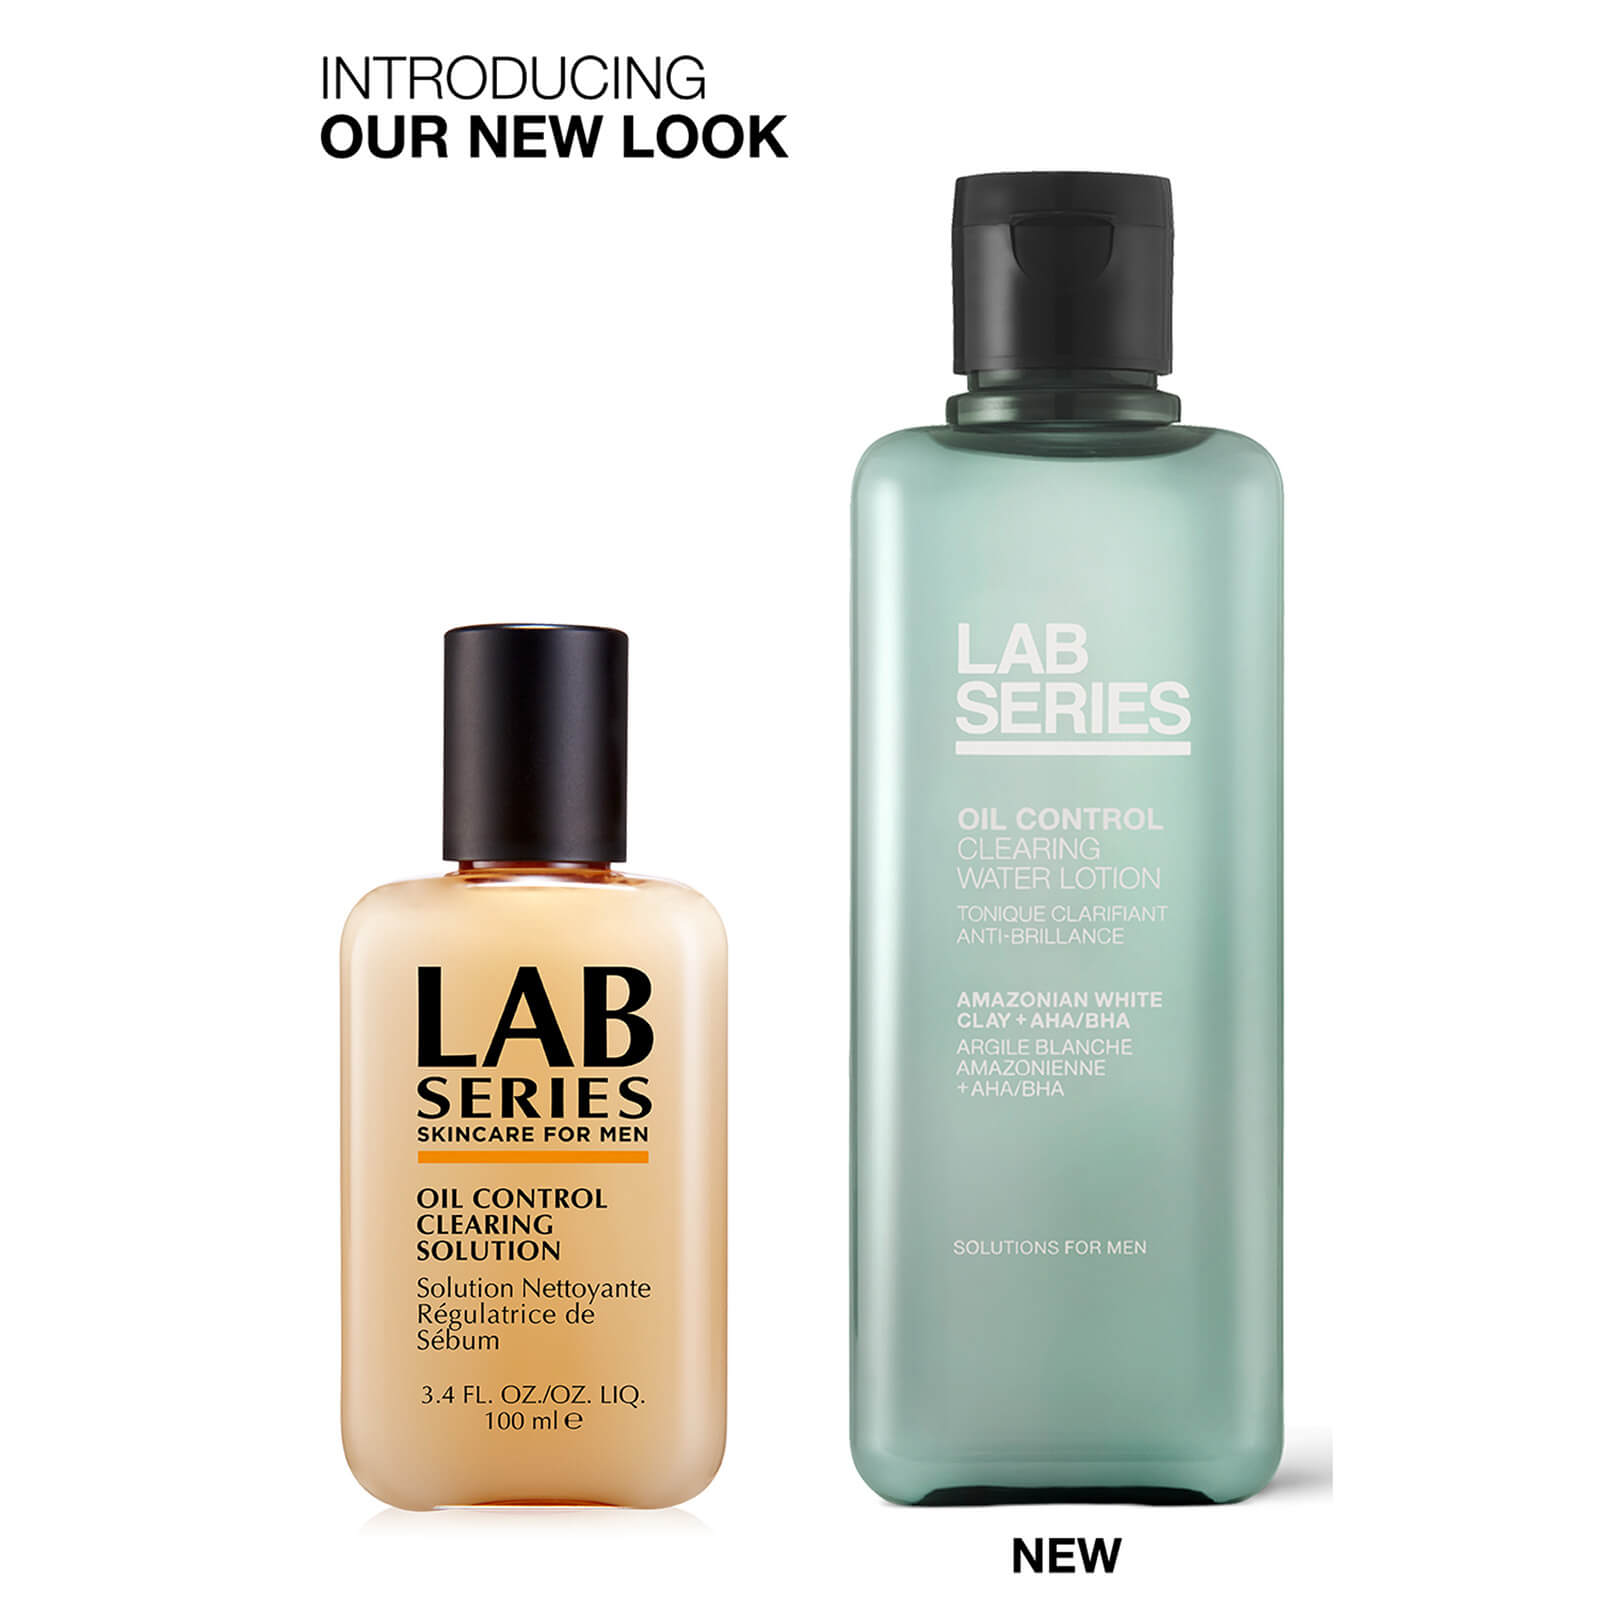 Lab Series Skincare for Men Oil Control Clearing Solution 100ml